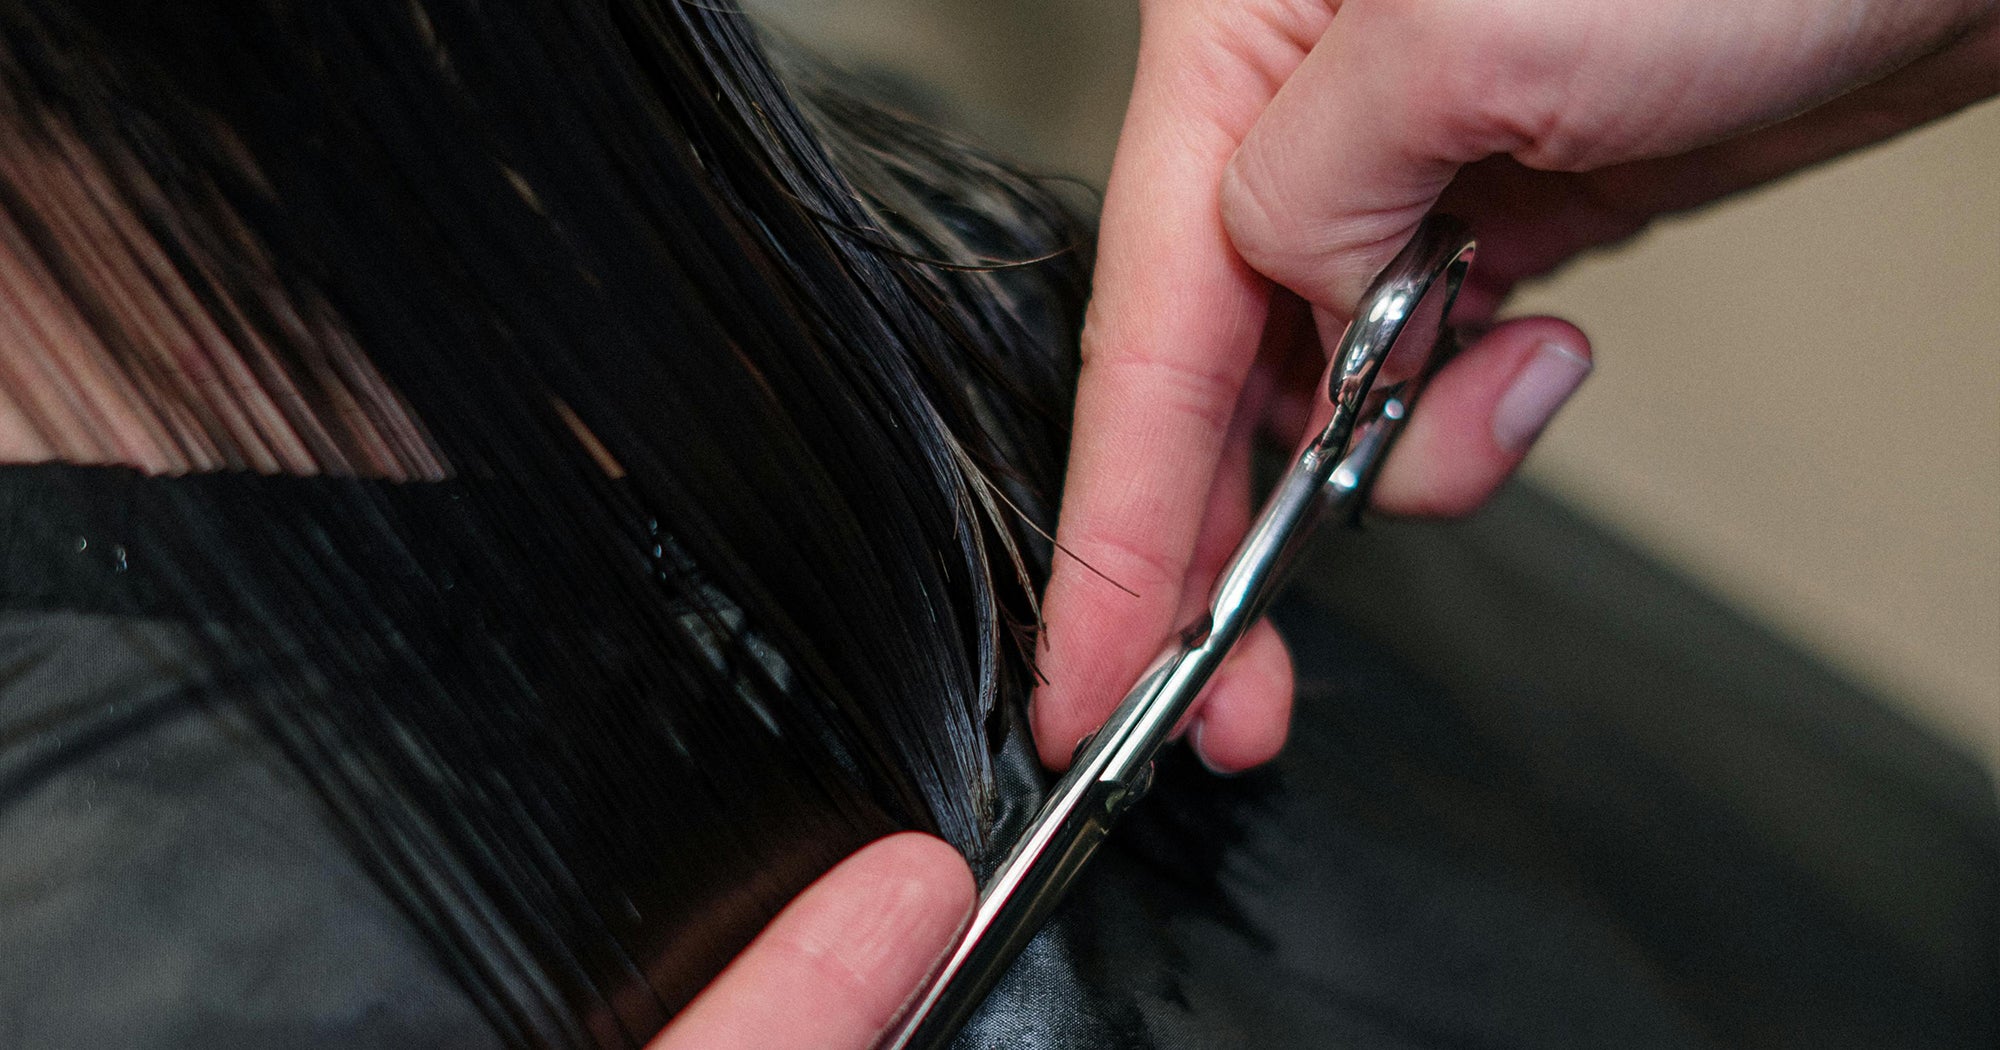 5 Hairdressers On The Exact Moment They Broke Up With A Client